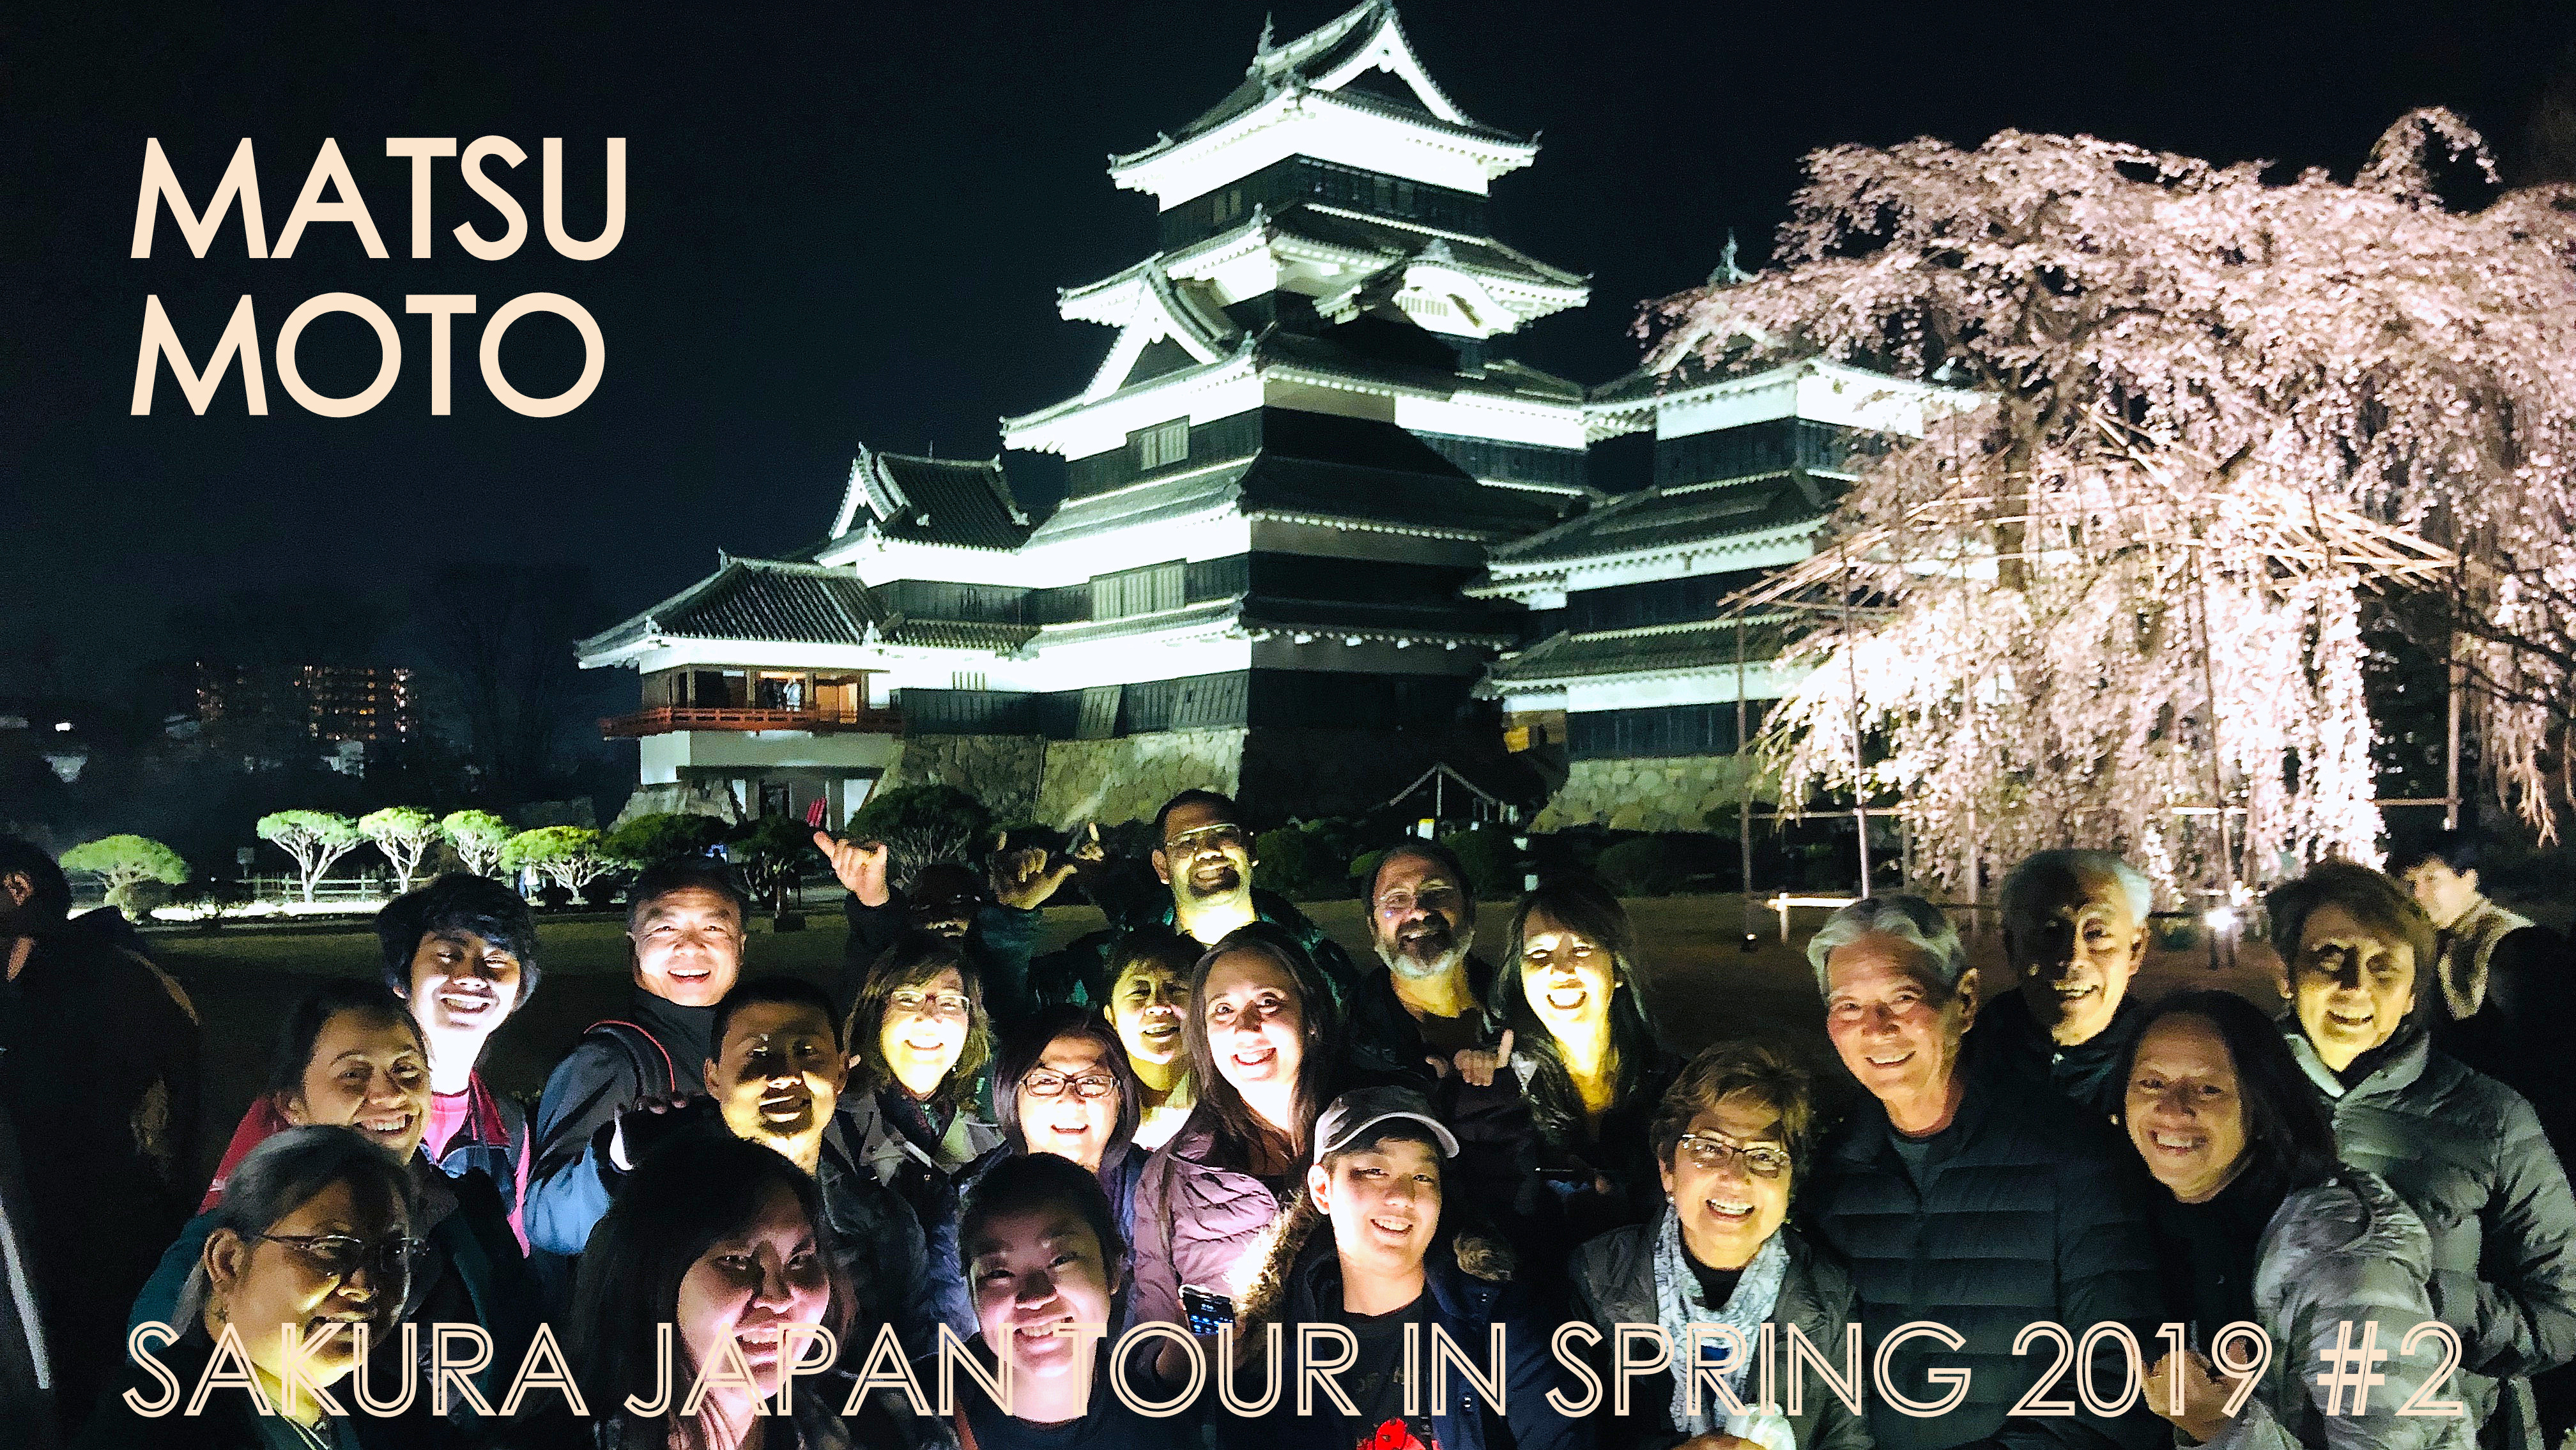 JAPAN ESCORTED TOUR IN SPRING 2019 #2